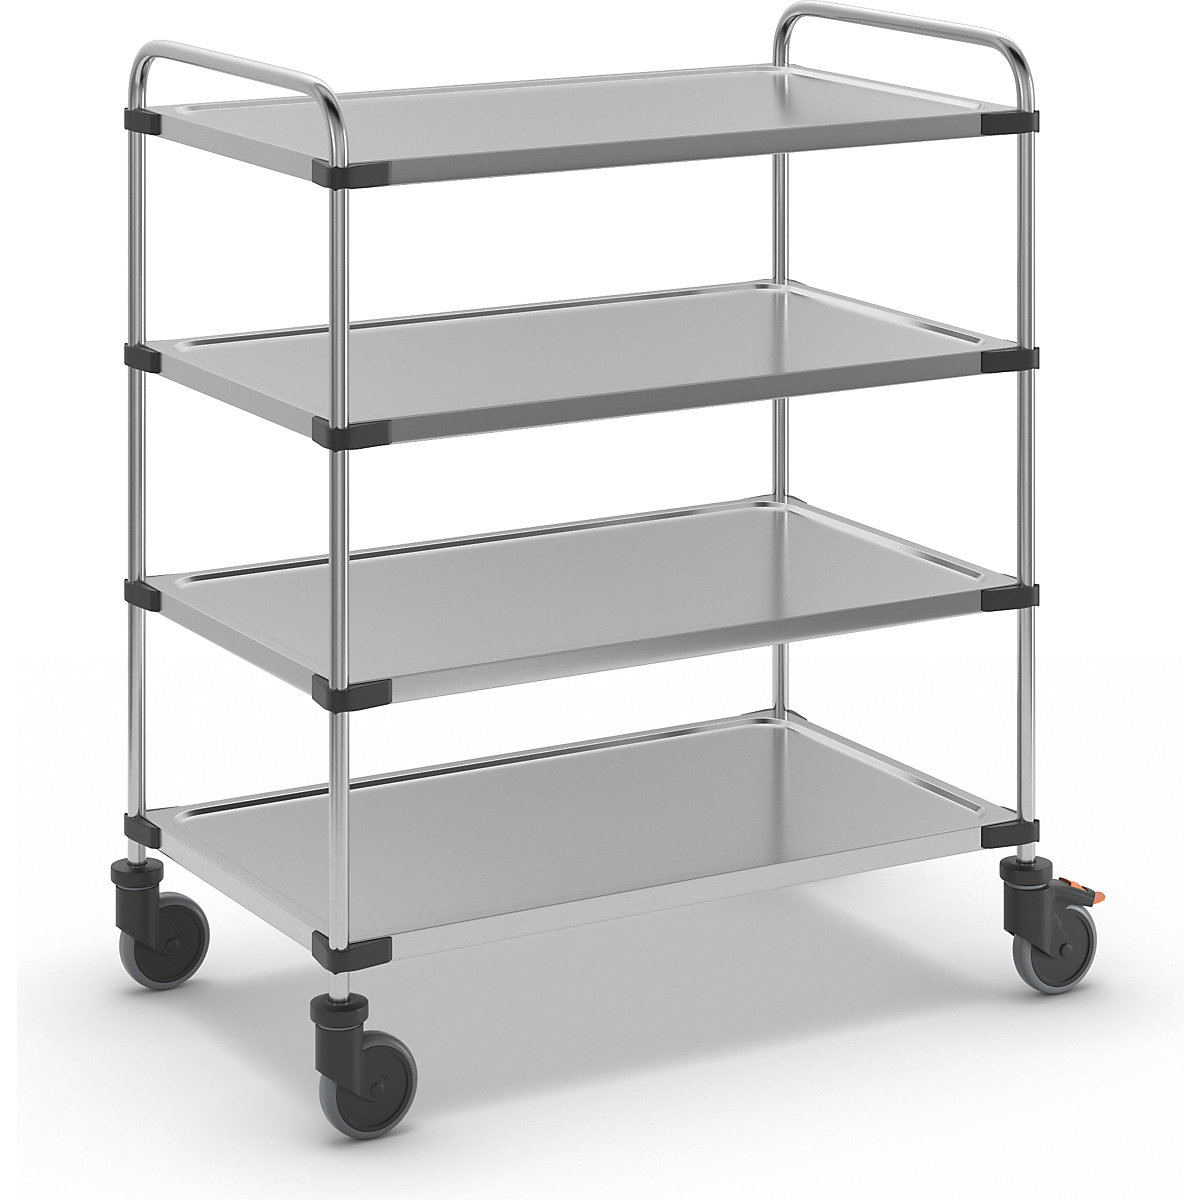 Stainless steel table trolley, with 4 shelves, LxWxH 1070 x 670 x 1260 mm, assembled-2